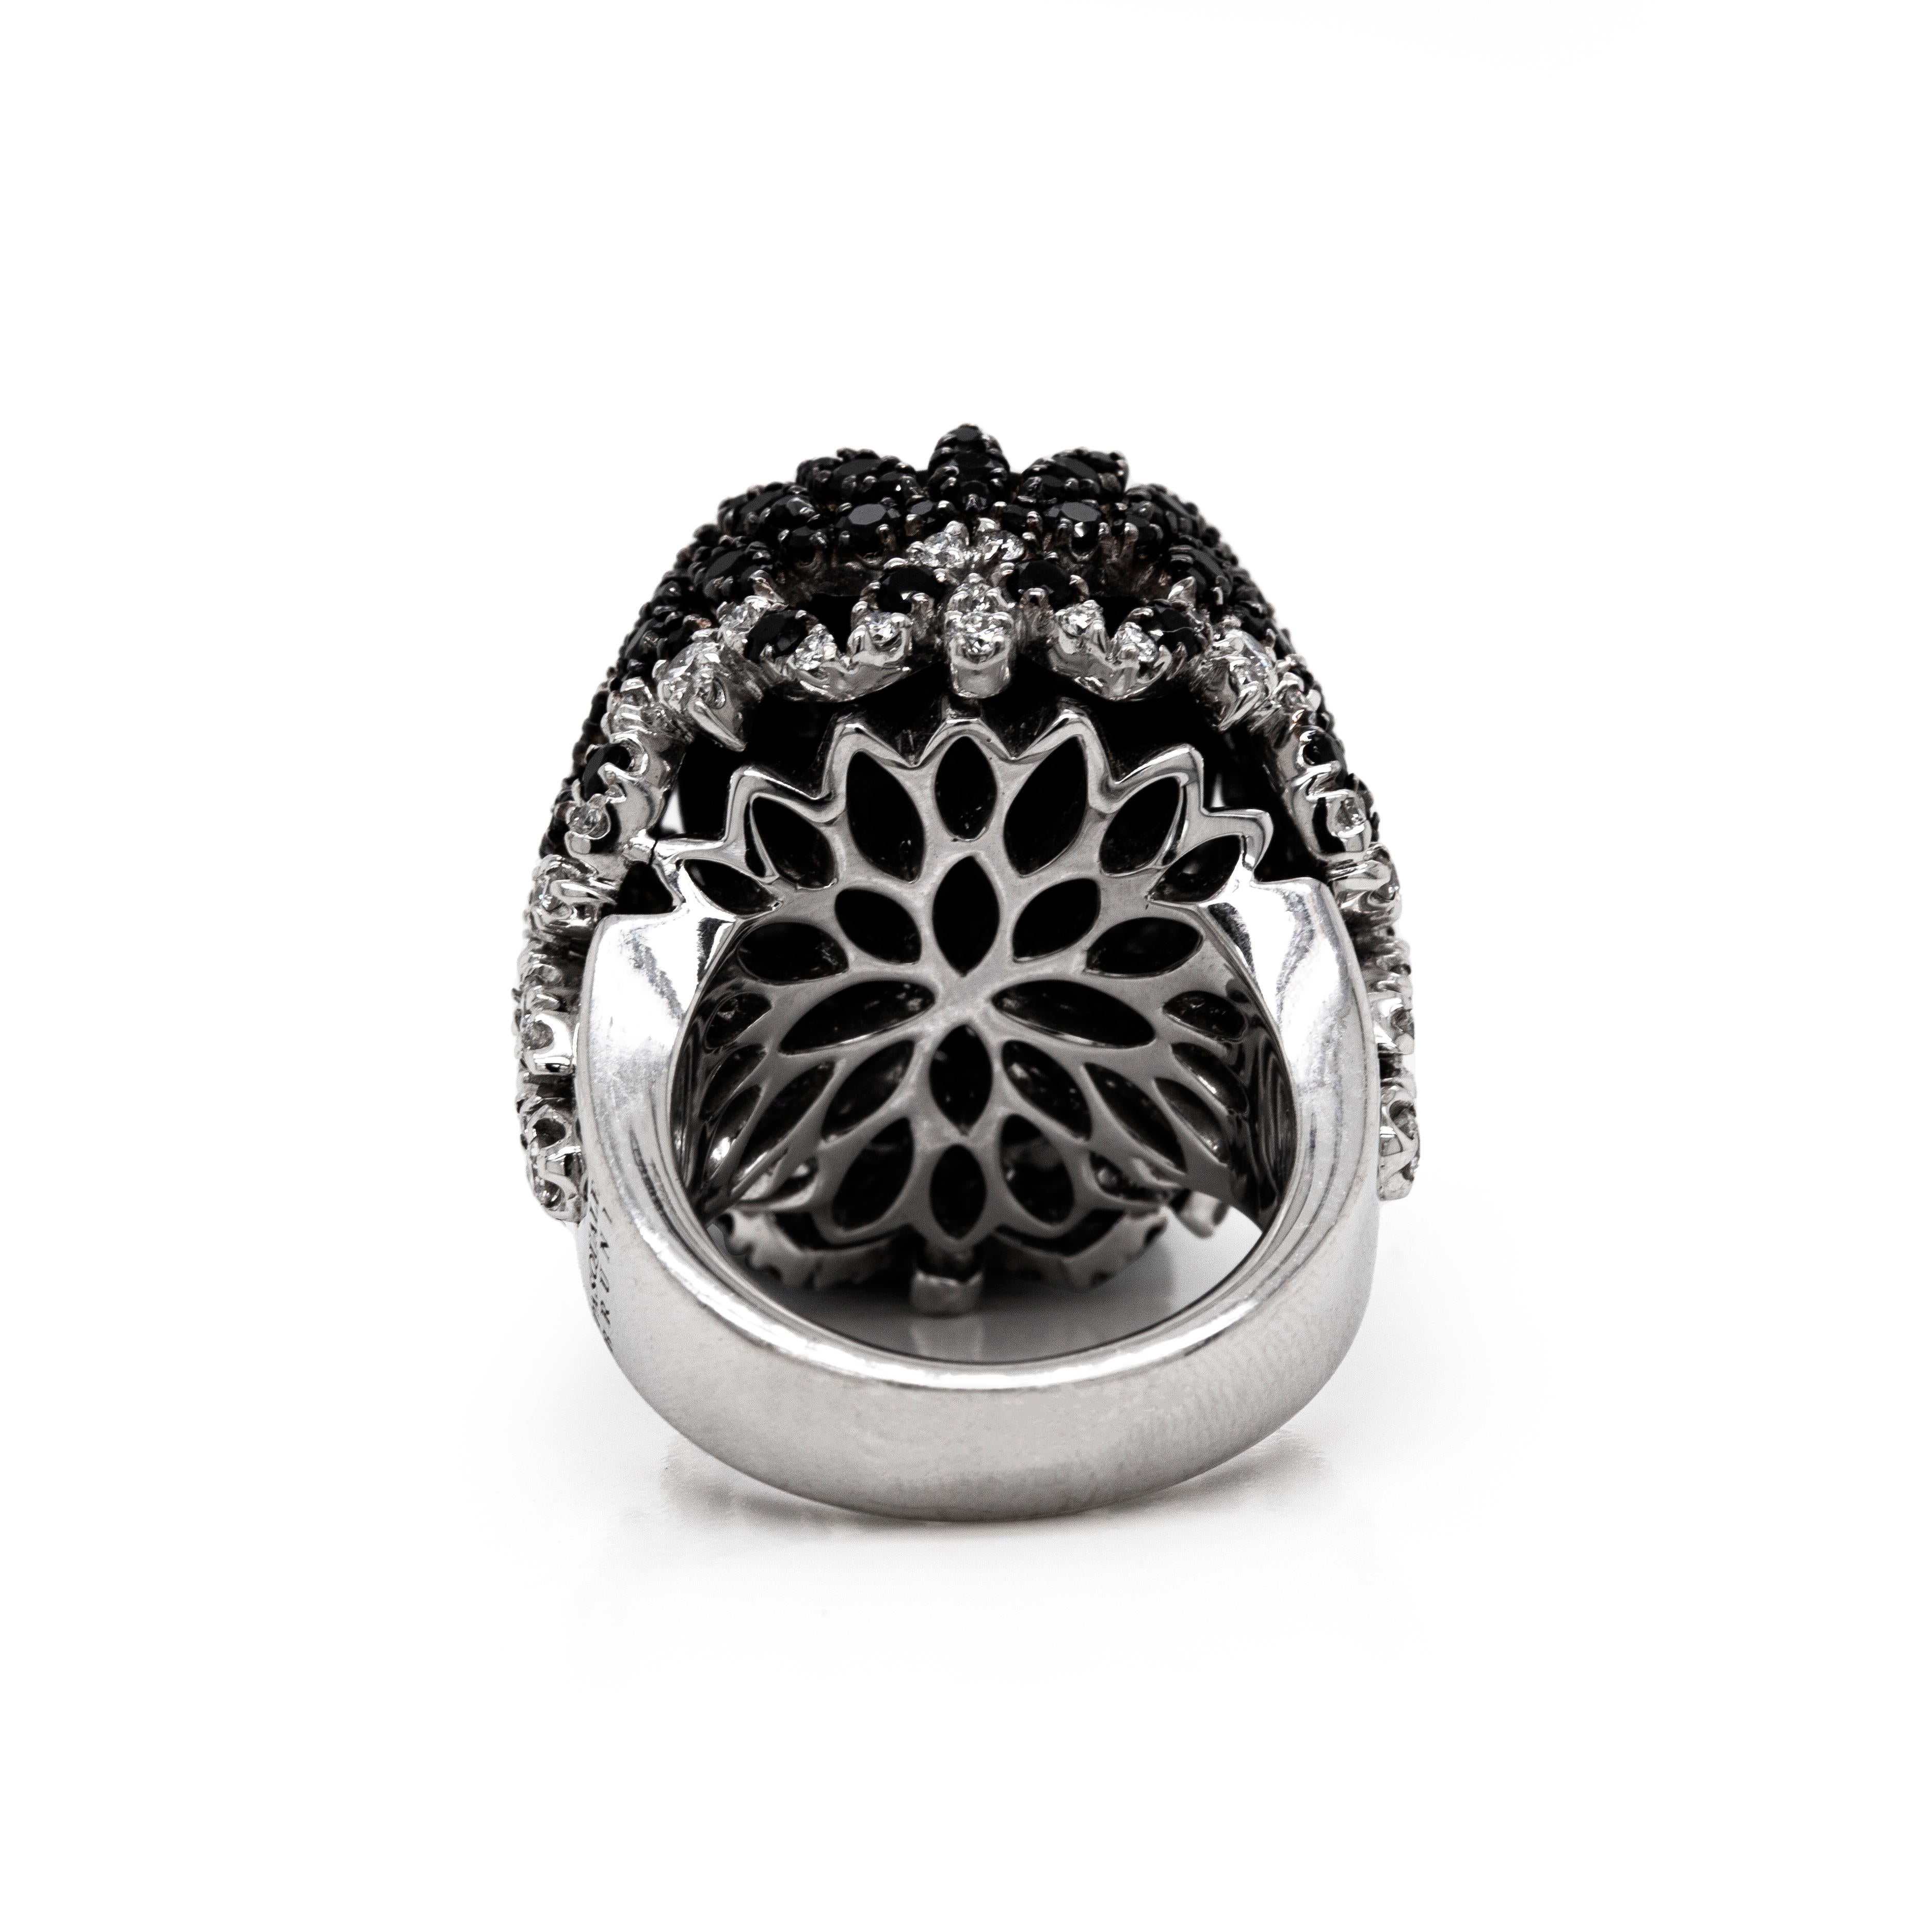 Oval Cut Pasquale Bruni 'Ghirlanda' Onyx, Black Spinel and Diamond 18K White Gold Ring For Sale